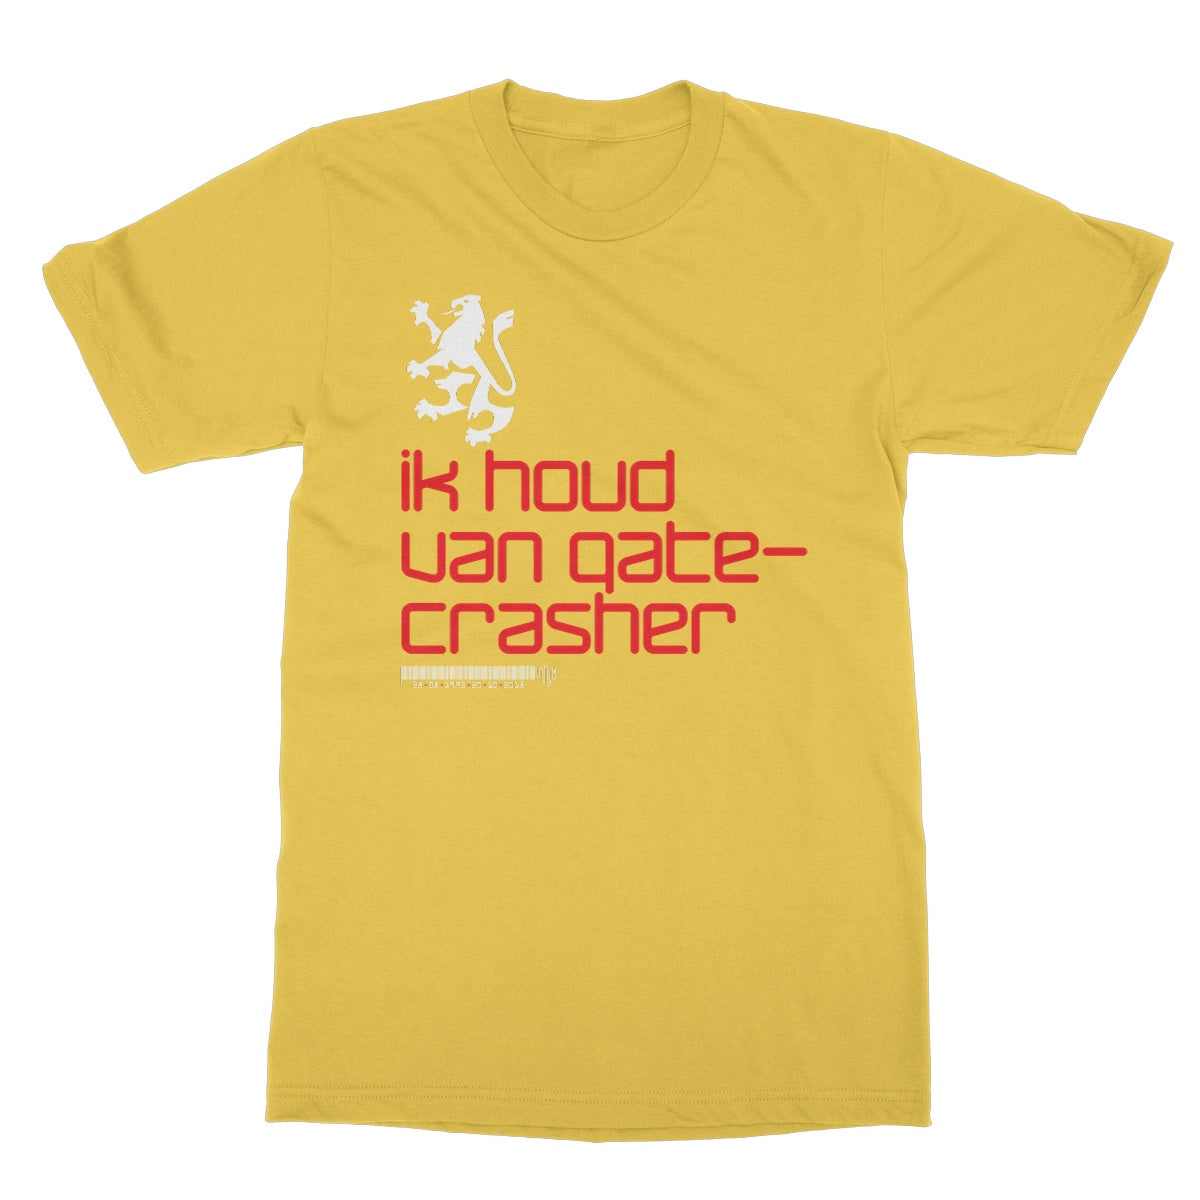 One for the Crazy Dutch Guys T-Shirt